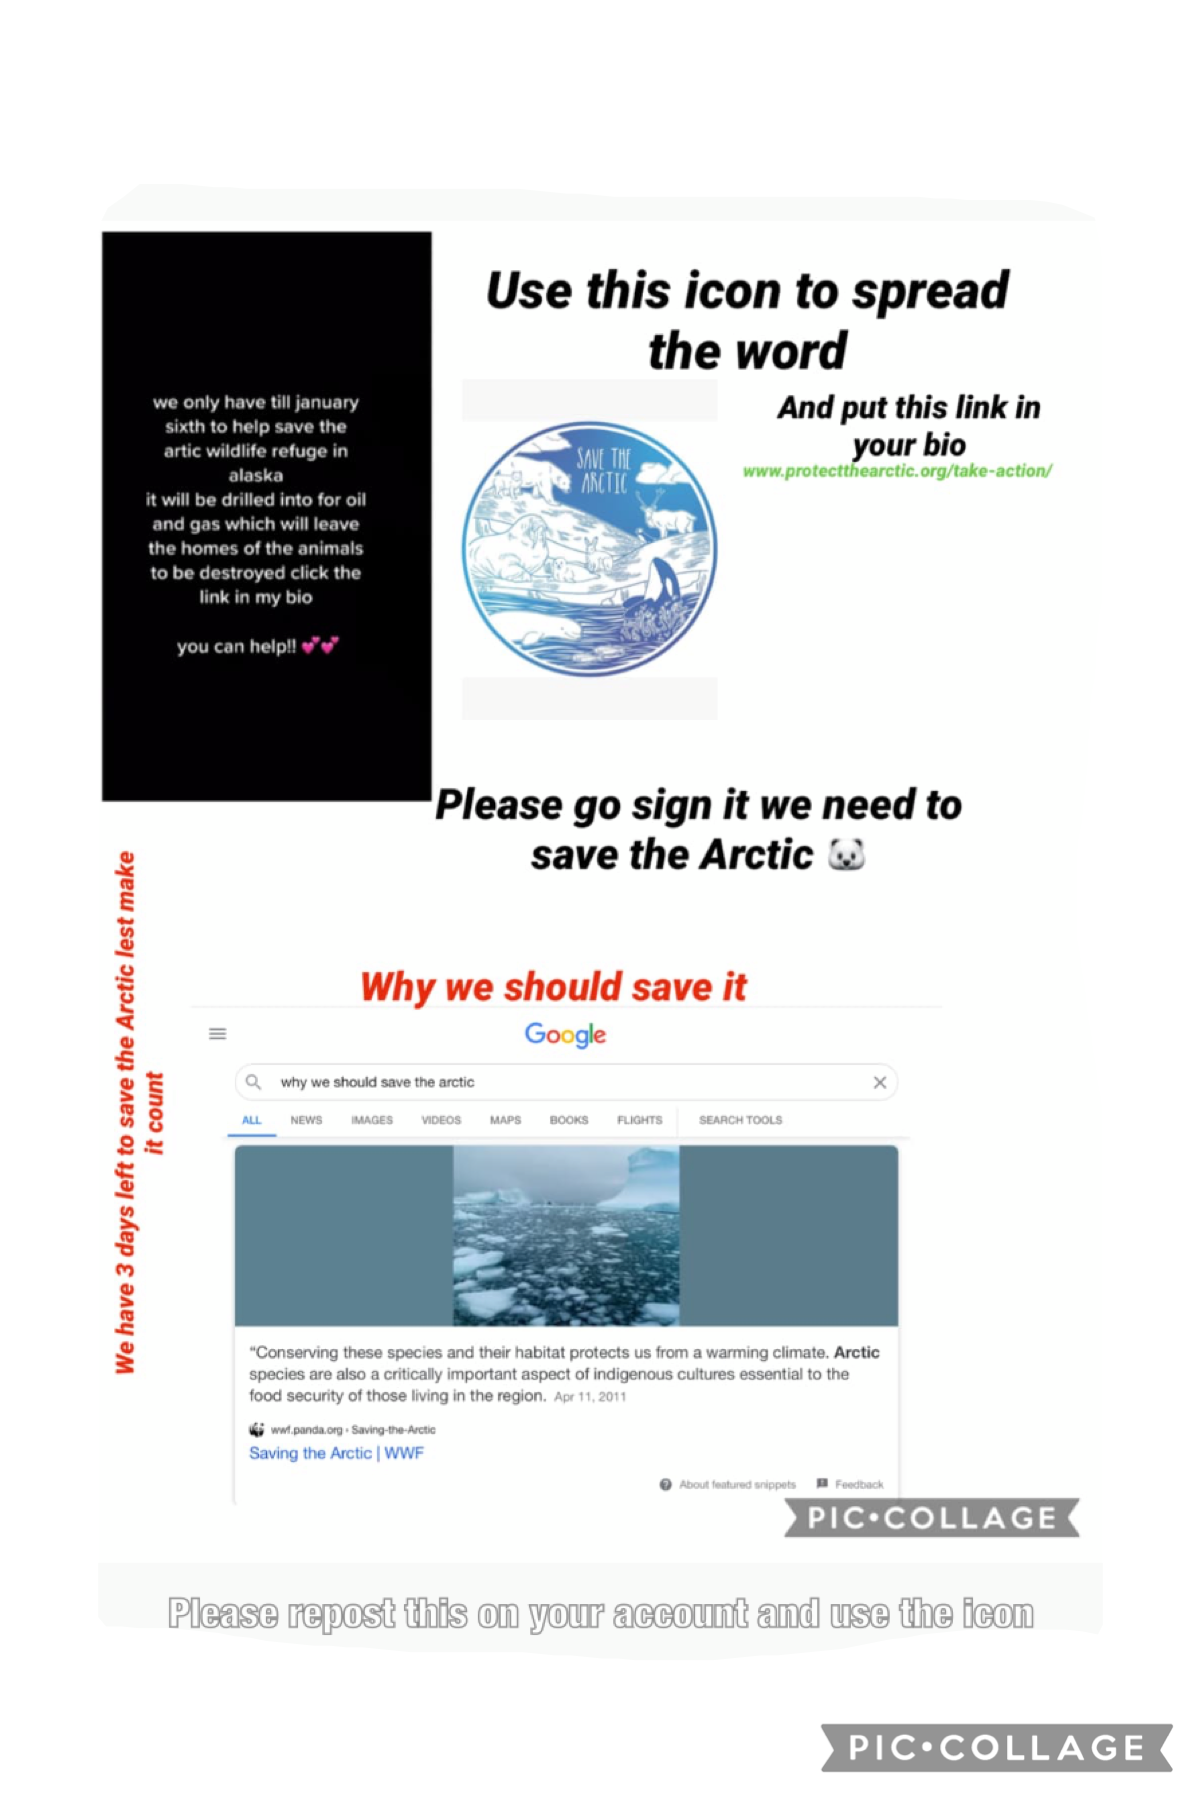 Save the Artic